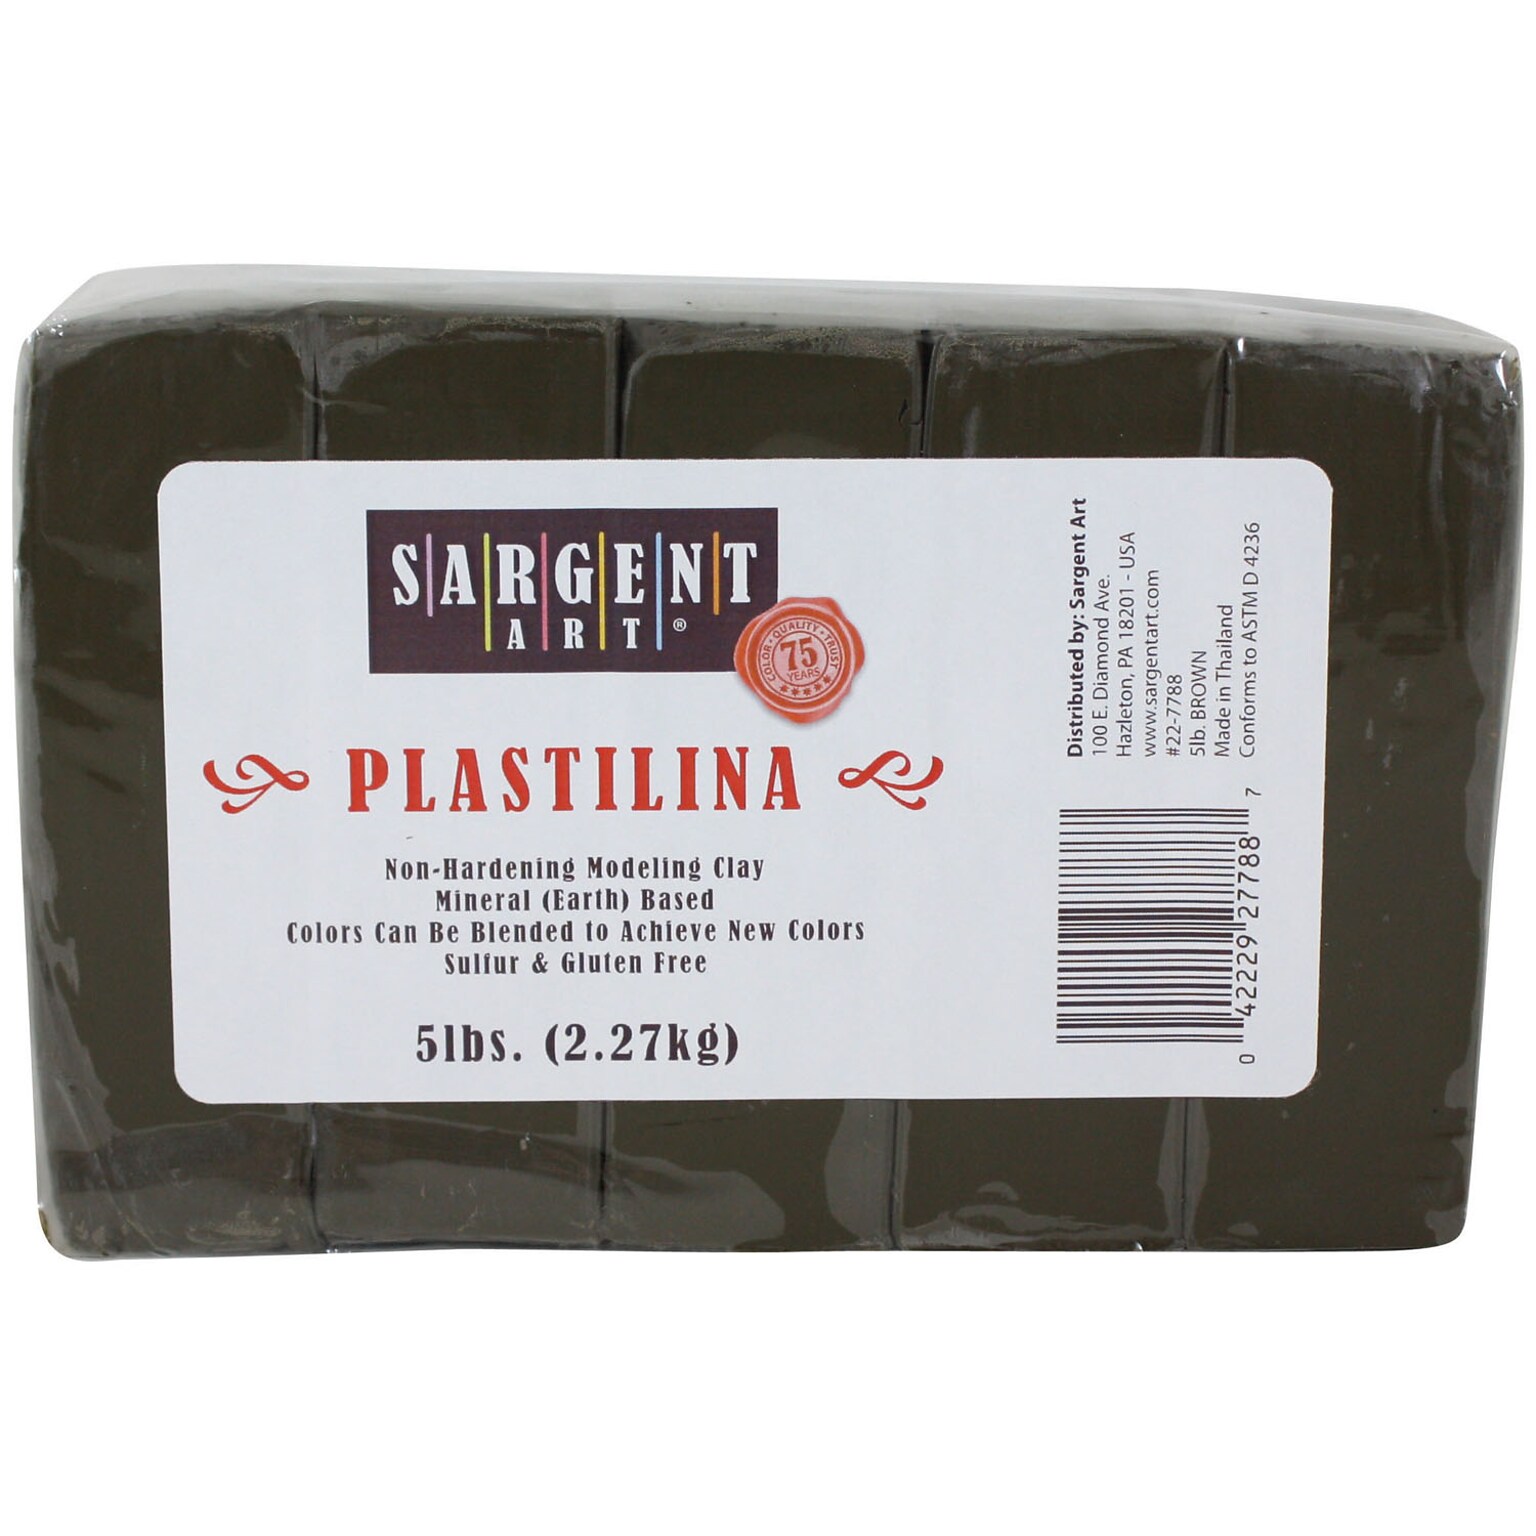 Sargent Art® Plastilina Non-Hardening Modeling Clay, Brown, 5 lbs. (SAR227788)